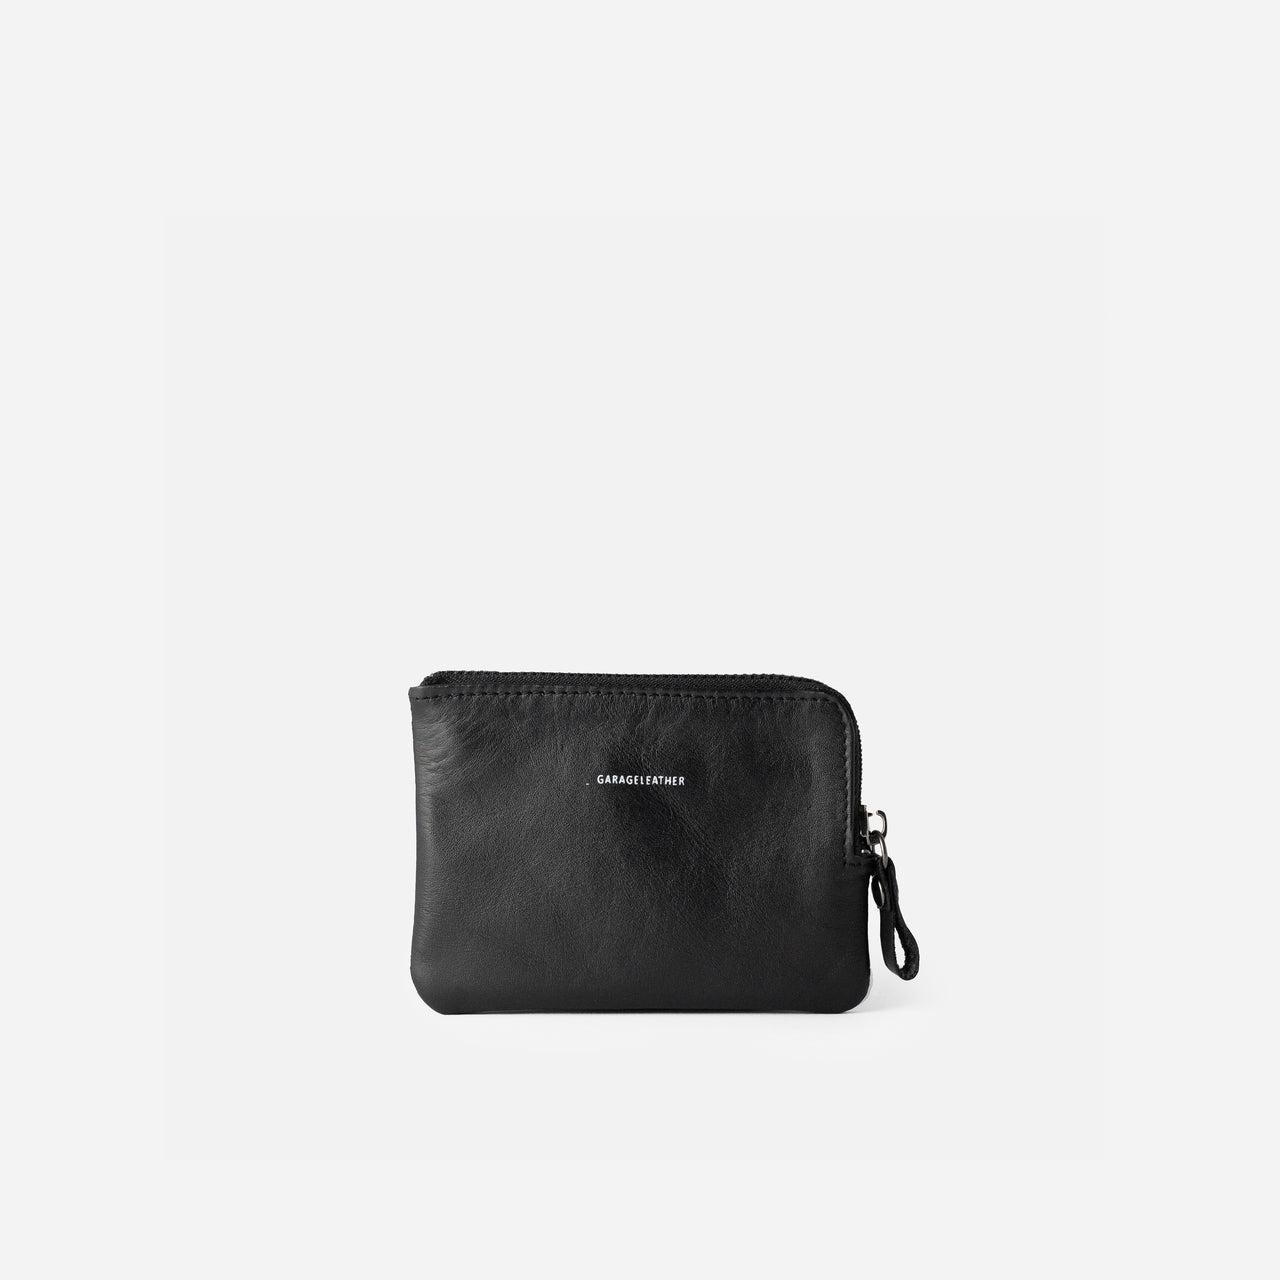 MINIMAL CARD POUCH WITH WRINKLES . BLACK